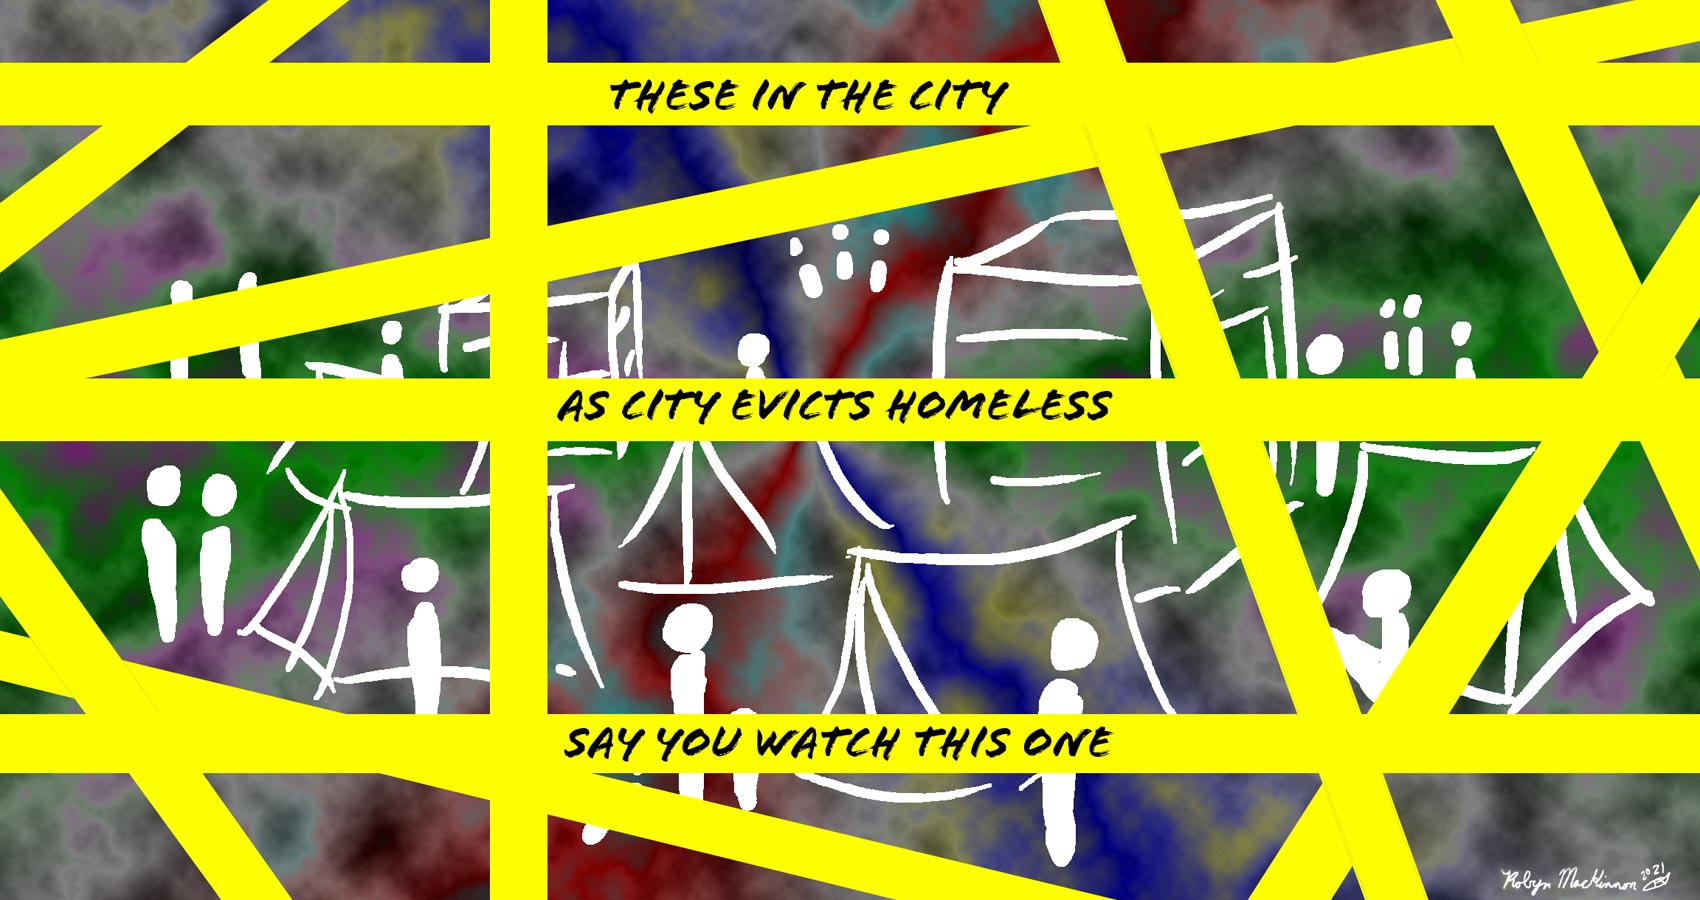 As The City Evicts, a haiku written by Robyn MacKinnon at Spillwords.com